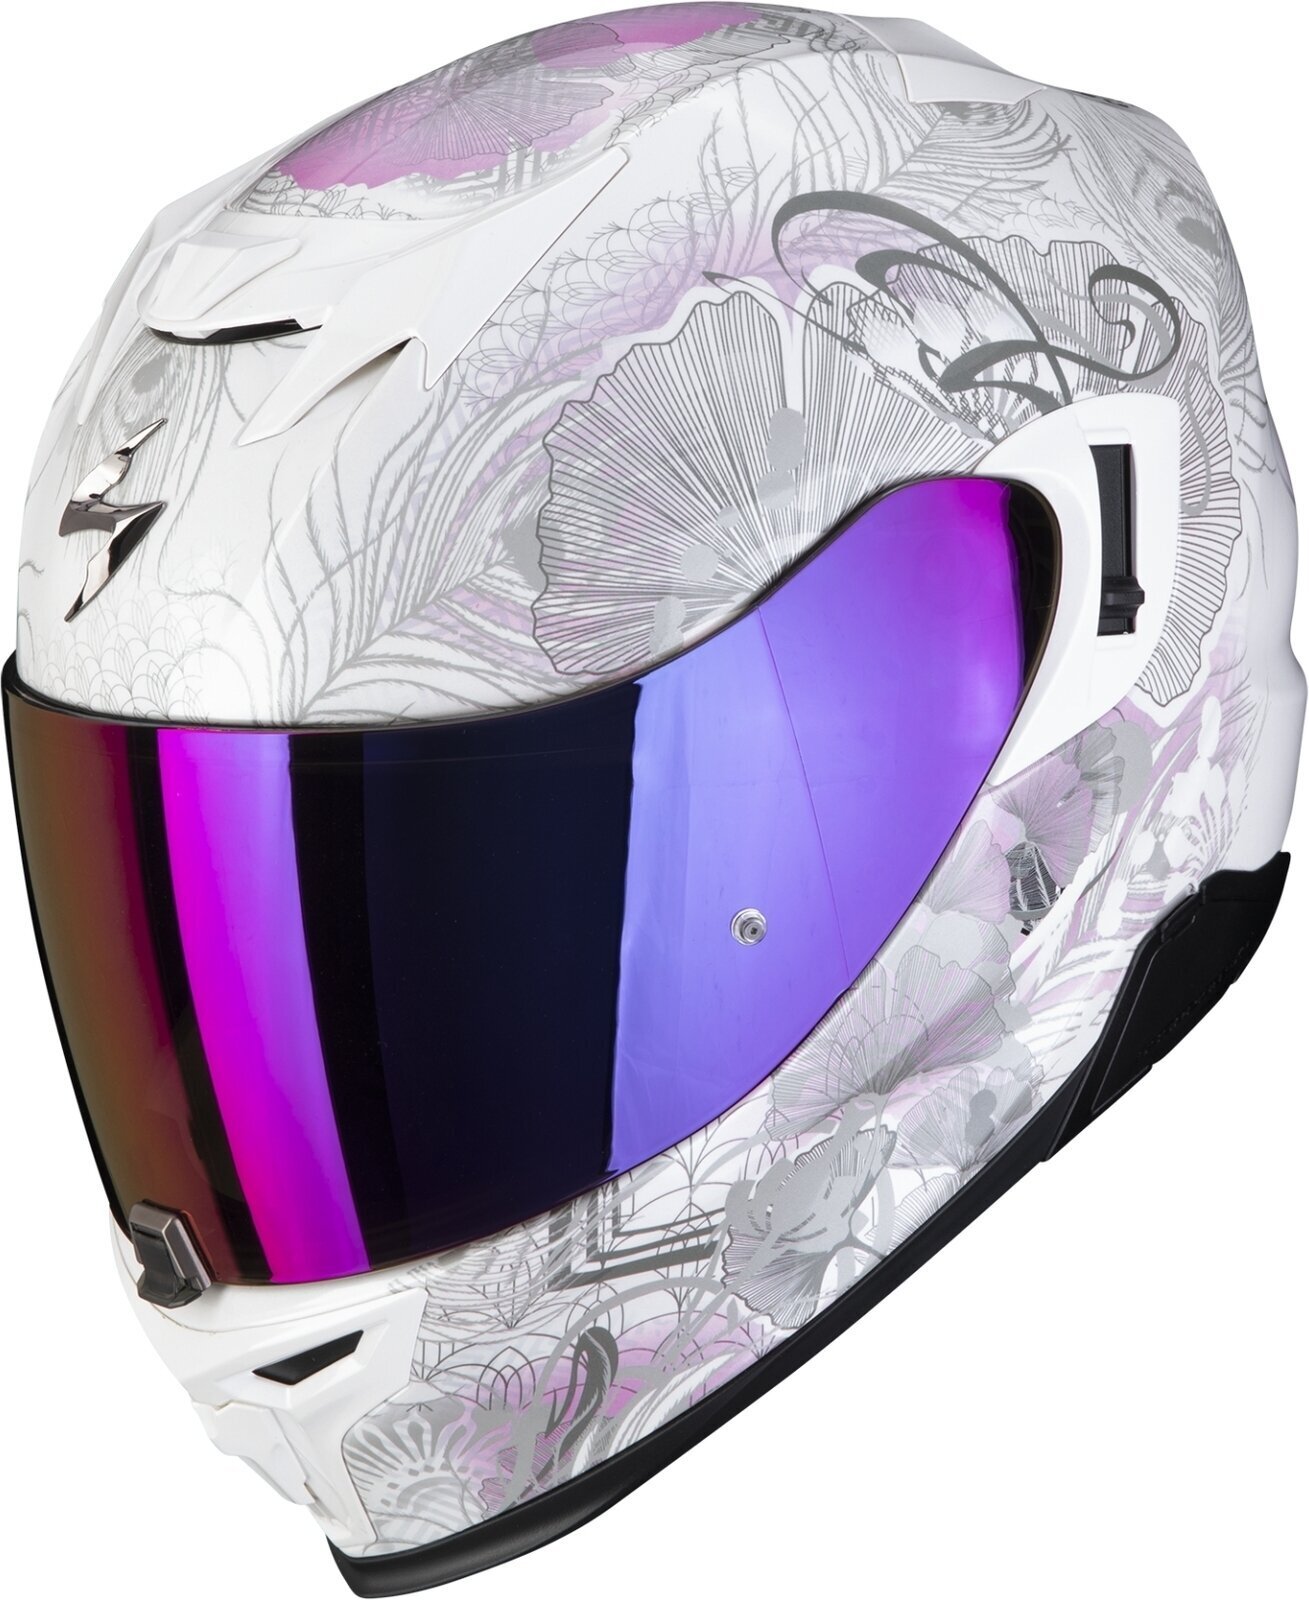 Kask Scorpion EXO 520 EVO AIR MELROSE Pearl White/Pink S Kask